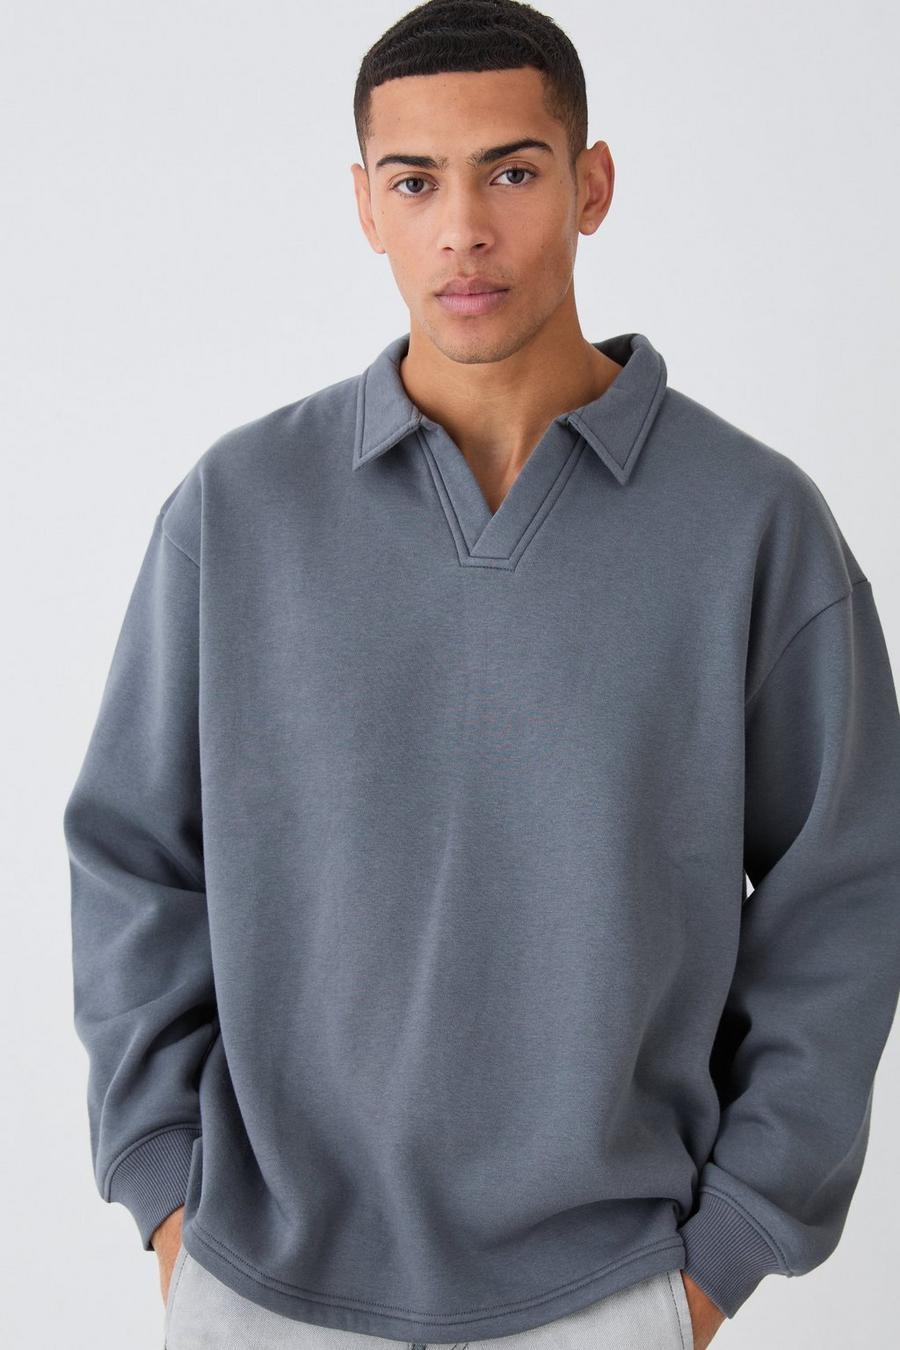 Charcoal Oversized Revere Rugby Sweatshirt Polo 